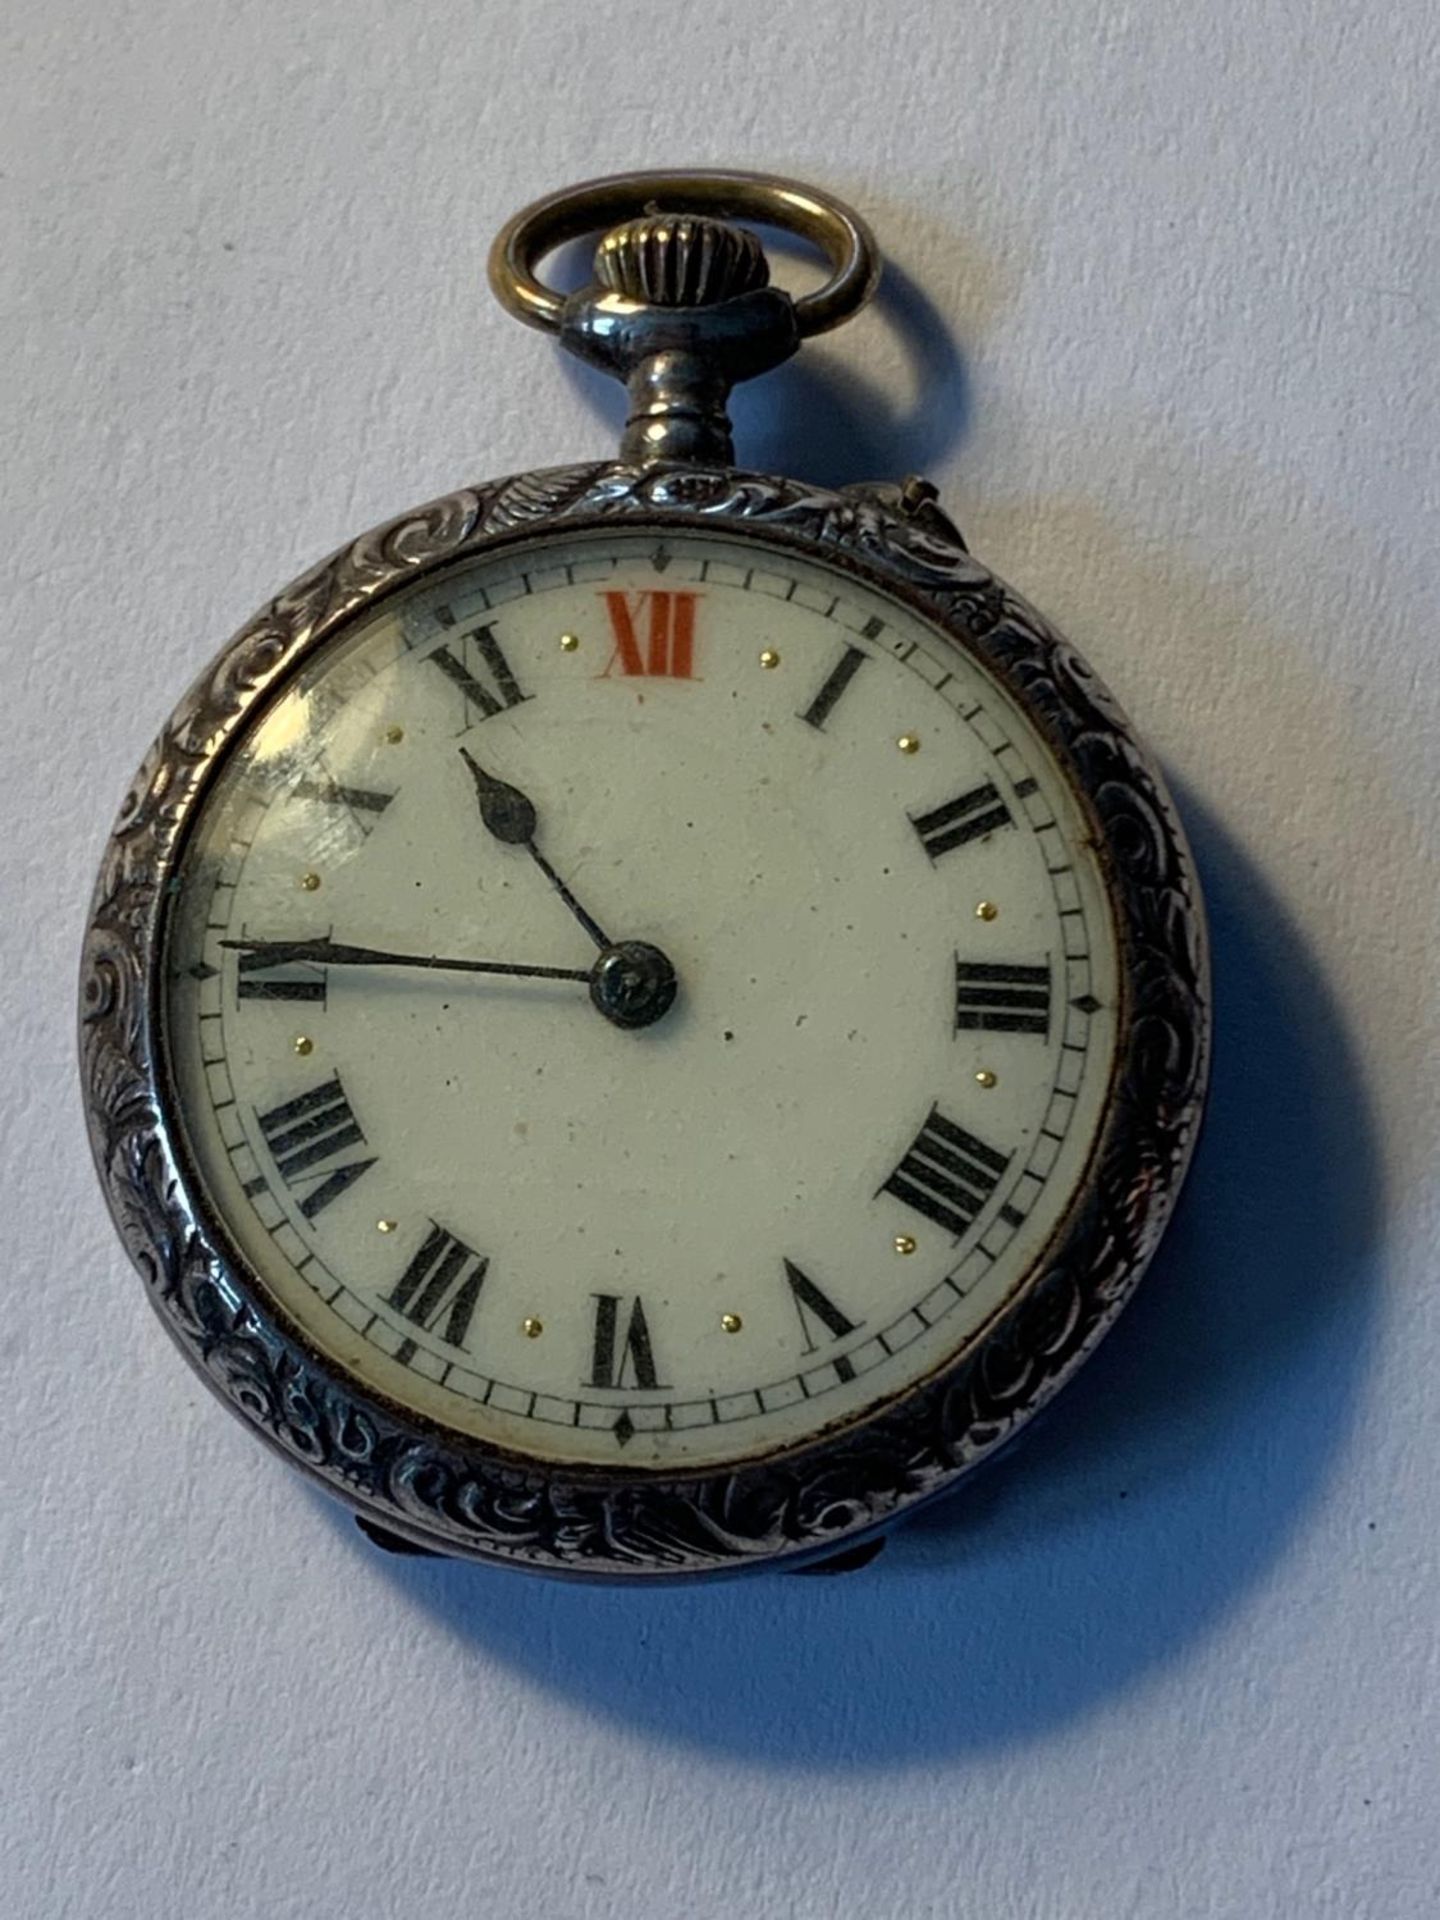 A MARKED 925 DECORATIVE SILVER POCKET WATCH WITH ENAMEL FACE AND ROMAN NUMERALS